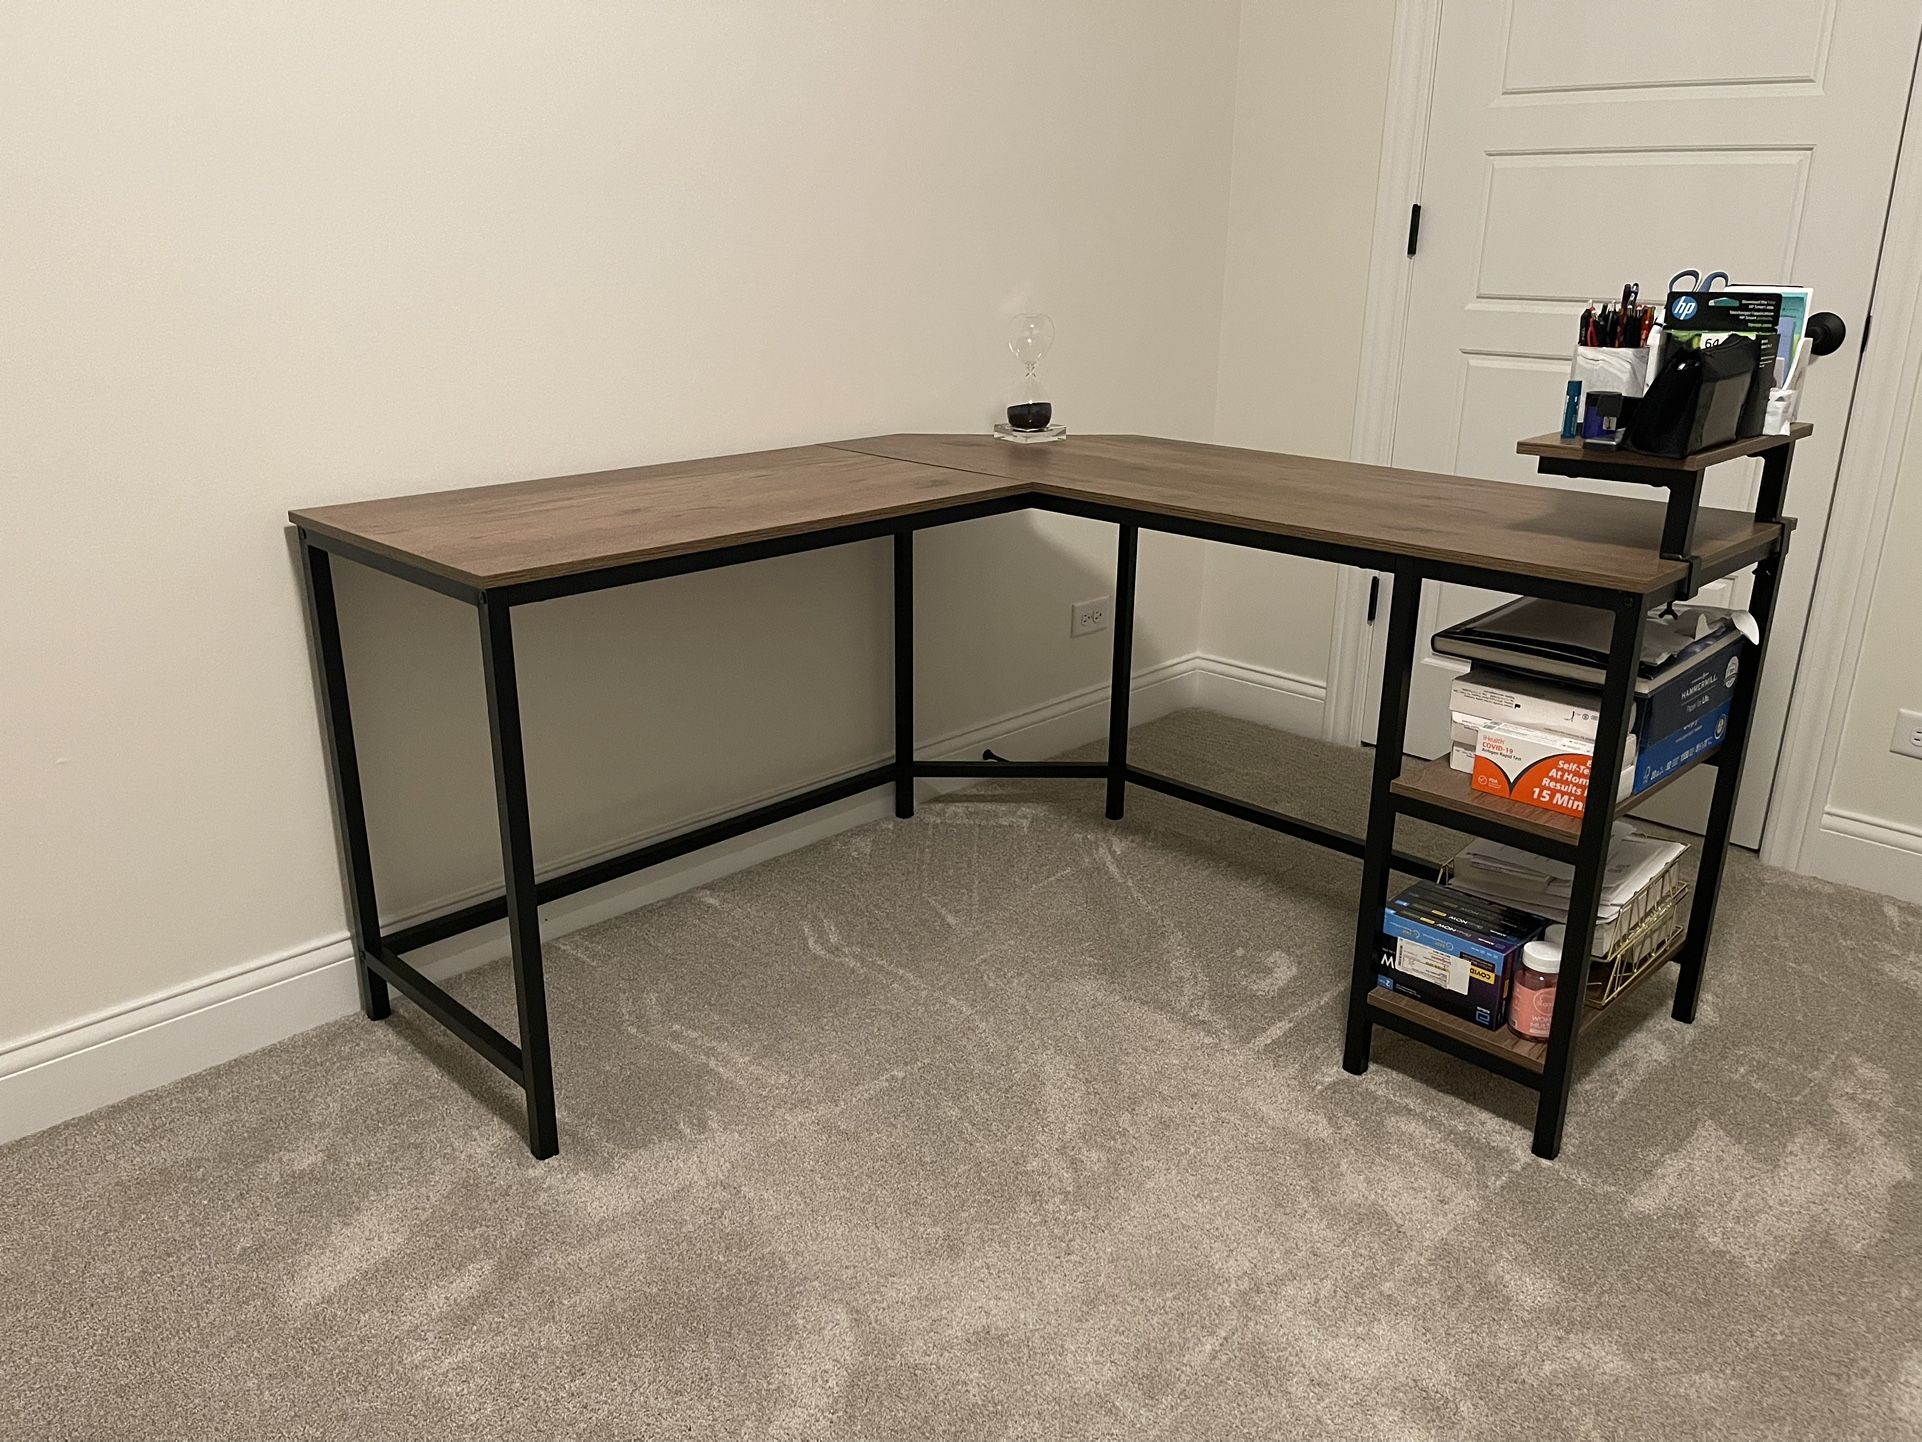 LINSY HOME Computer Desk 54 inch, L Shaped Desk with Shelves Large Monitor Stand, Corner Desk for Office Home, Easy to Assemble, Wood.